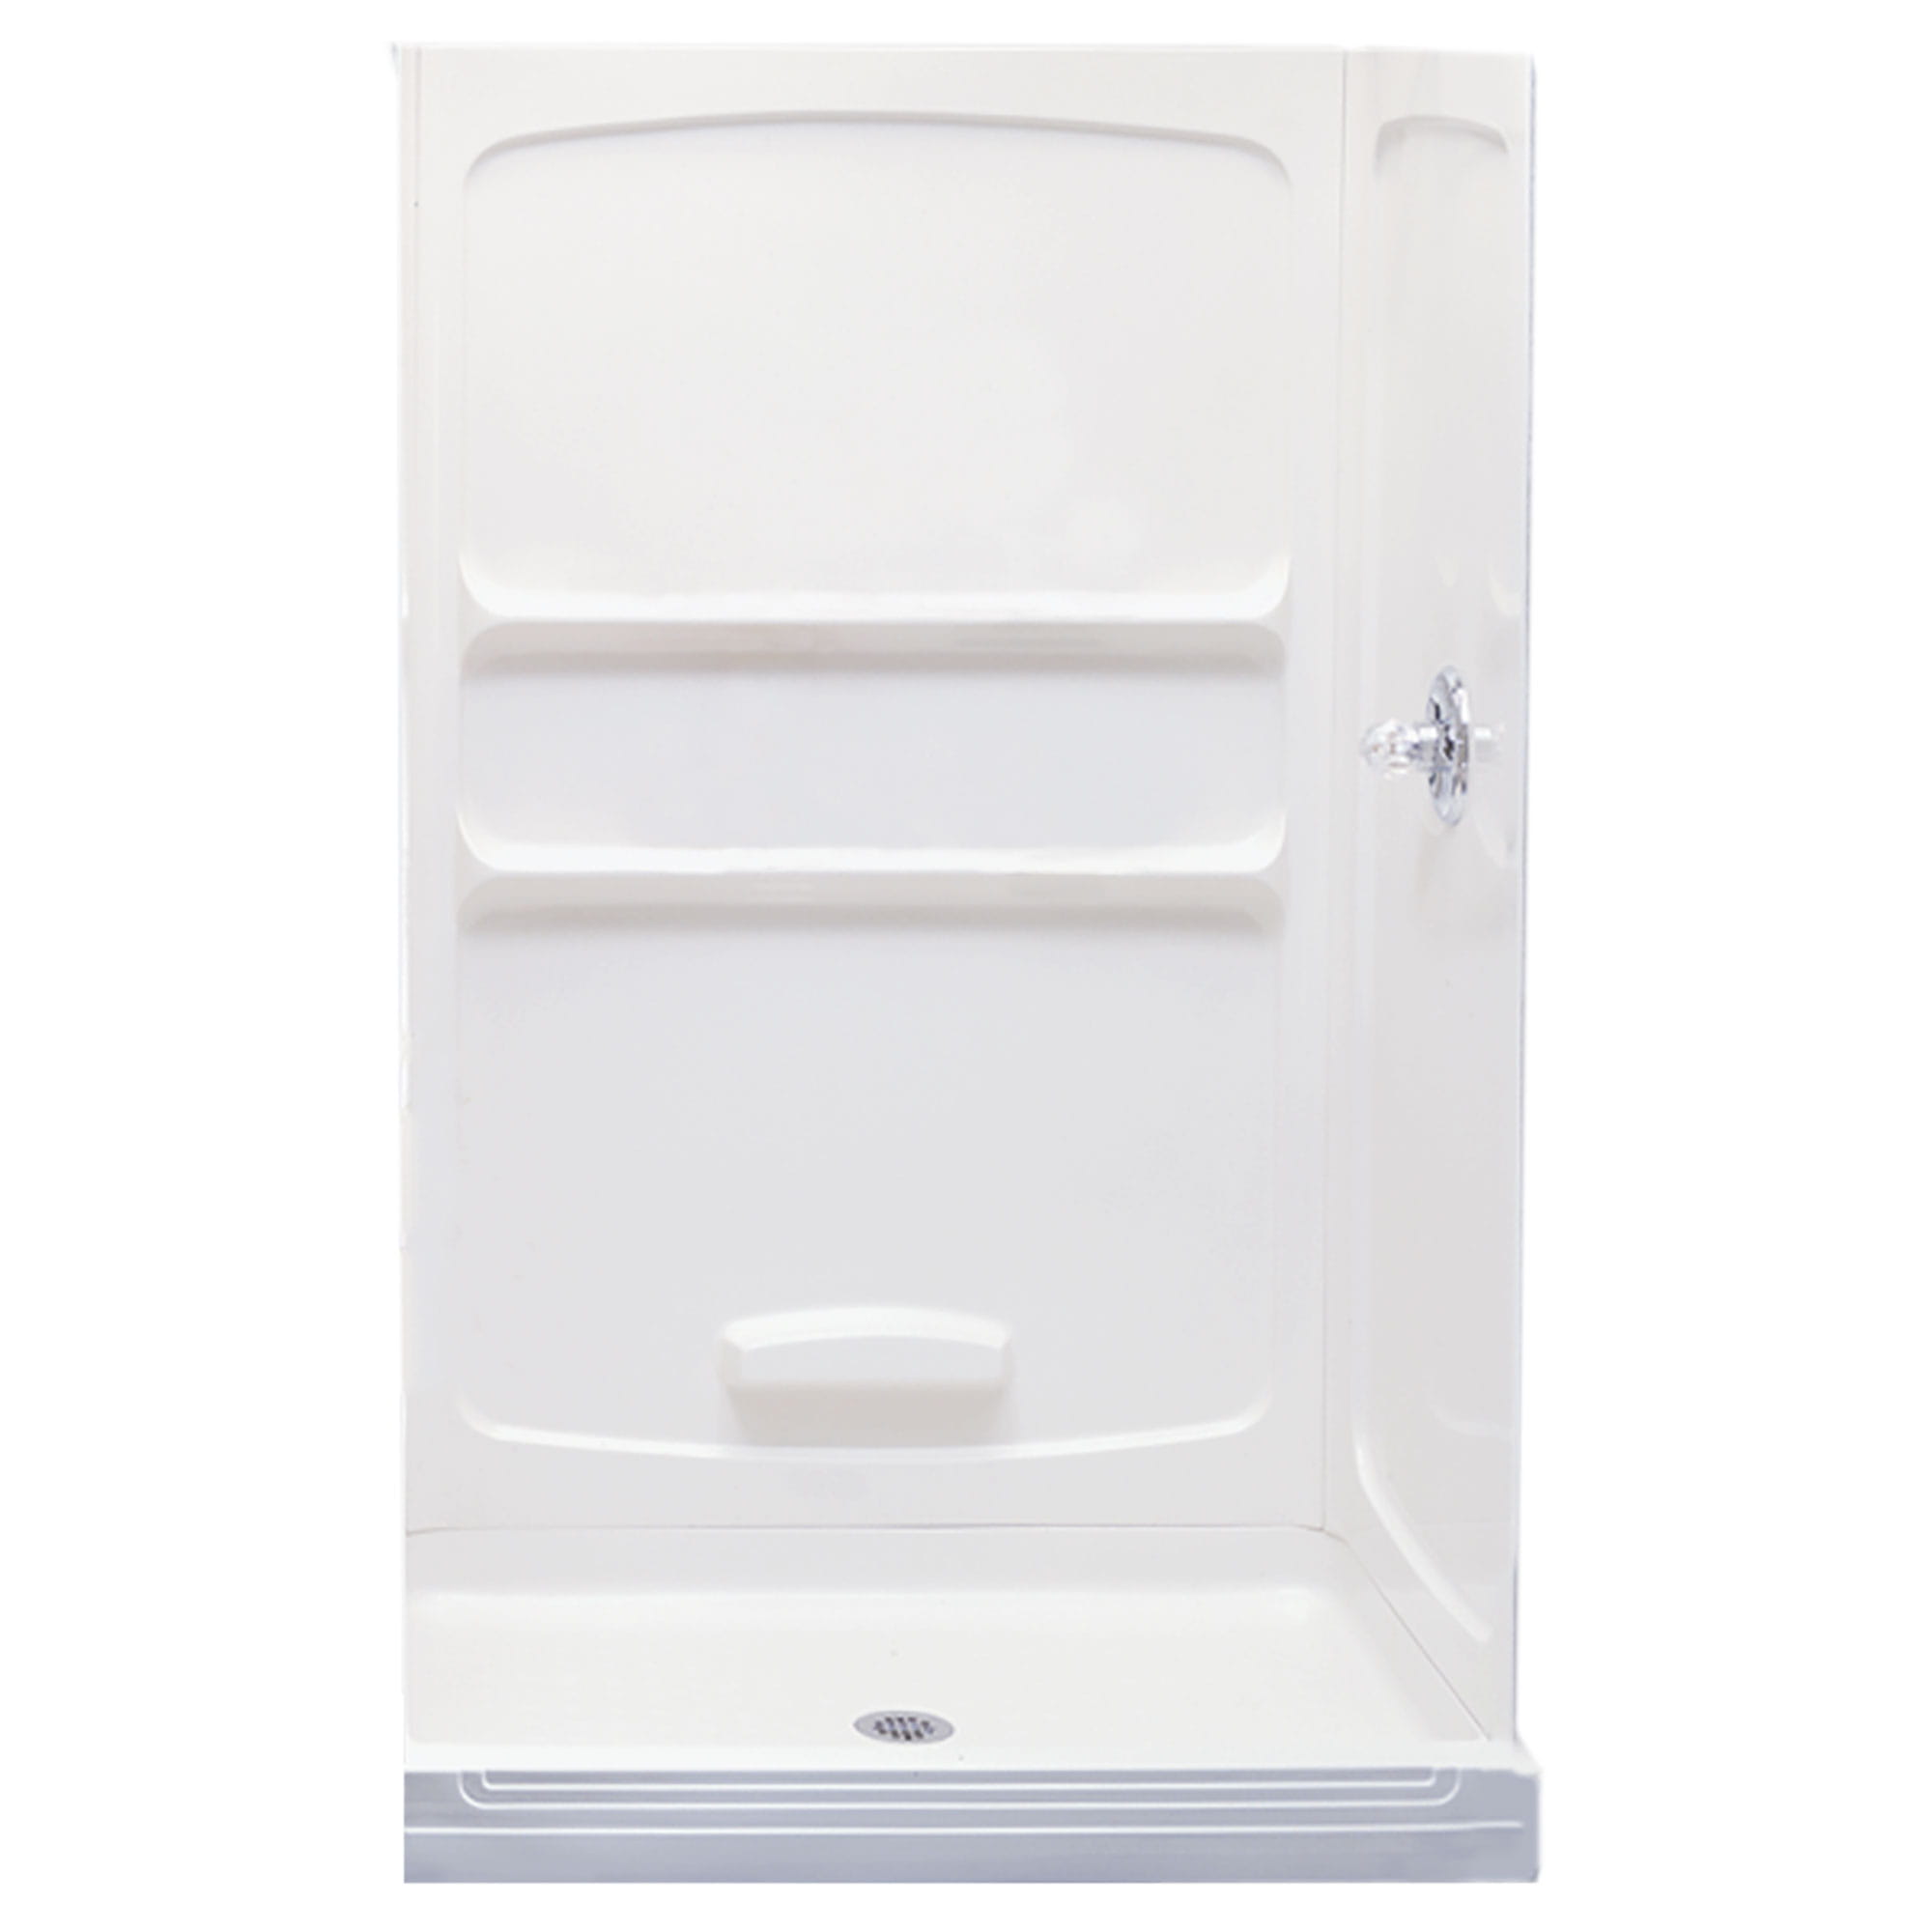 Town Square 48 Inch by 34 Inch Alcove Shower Base